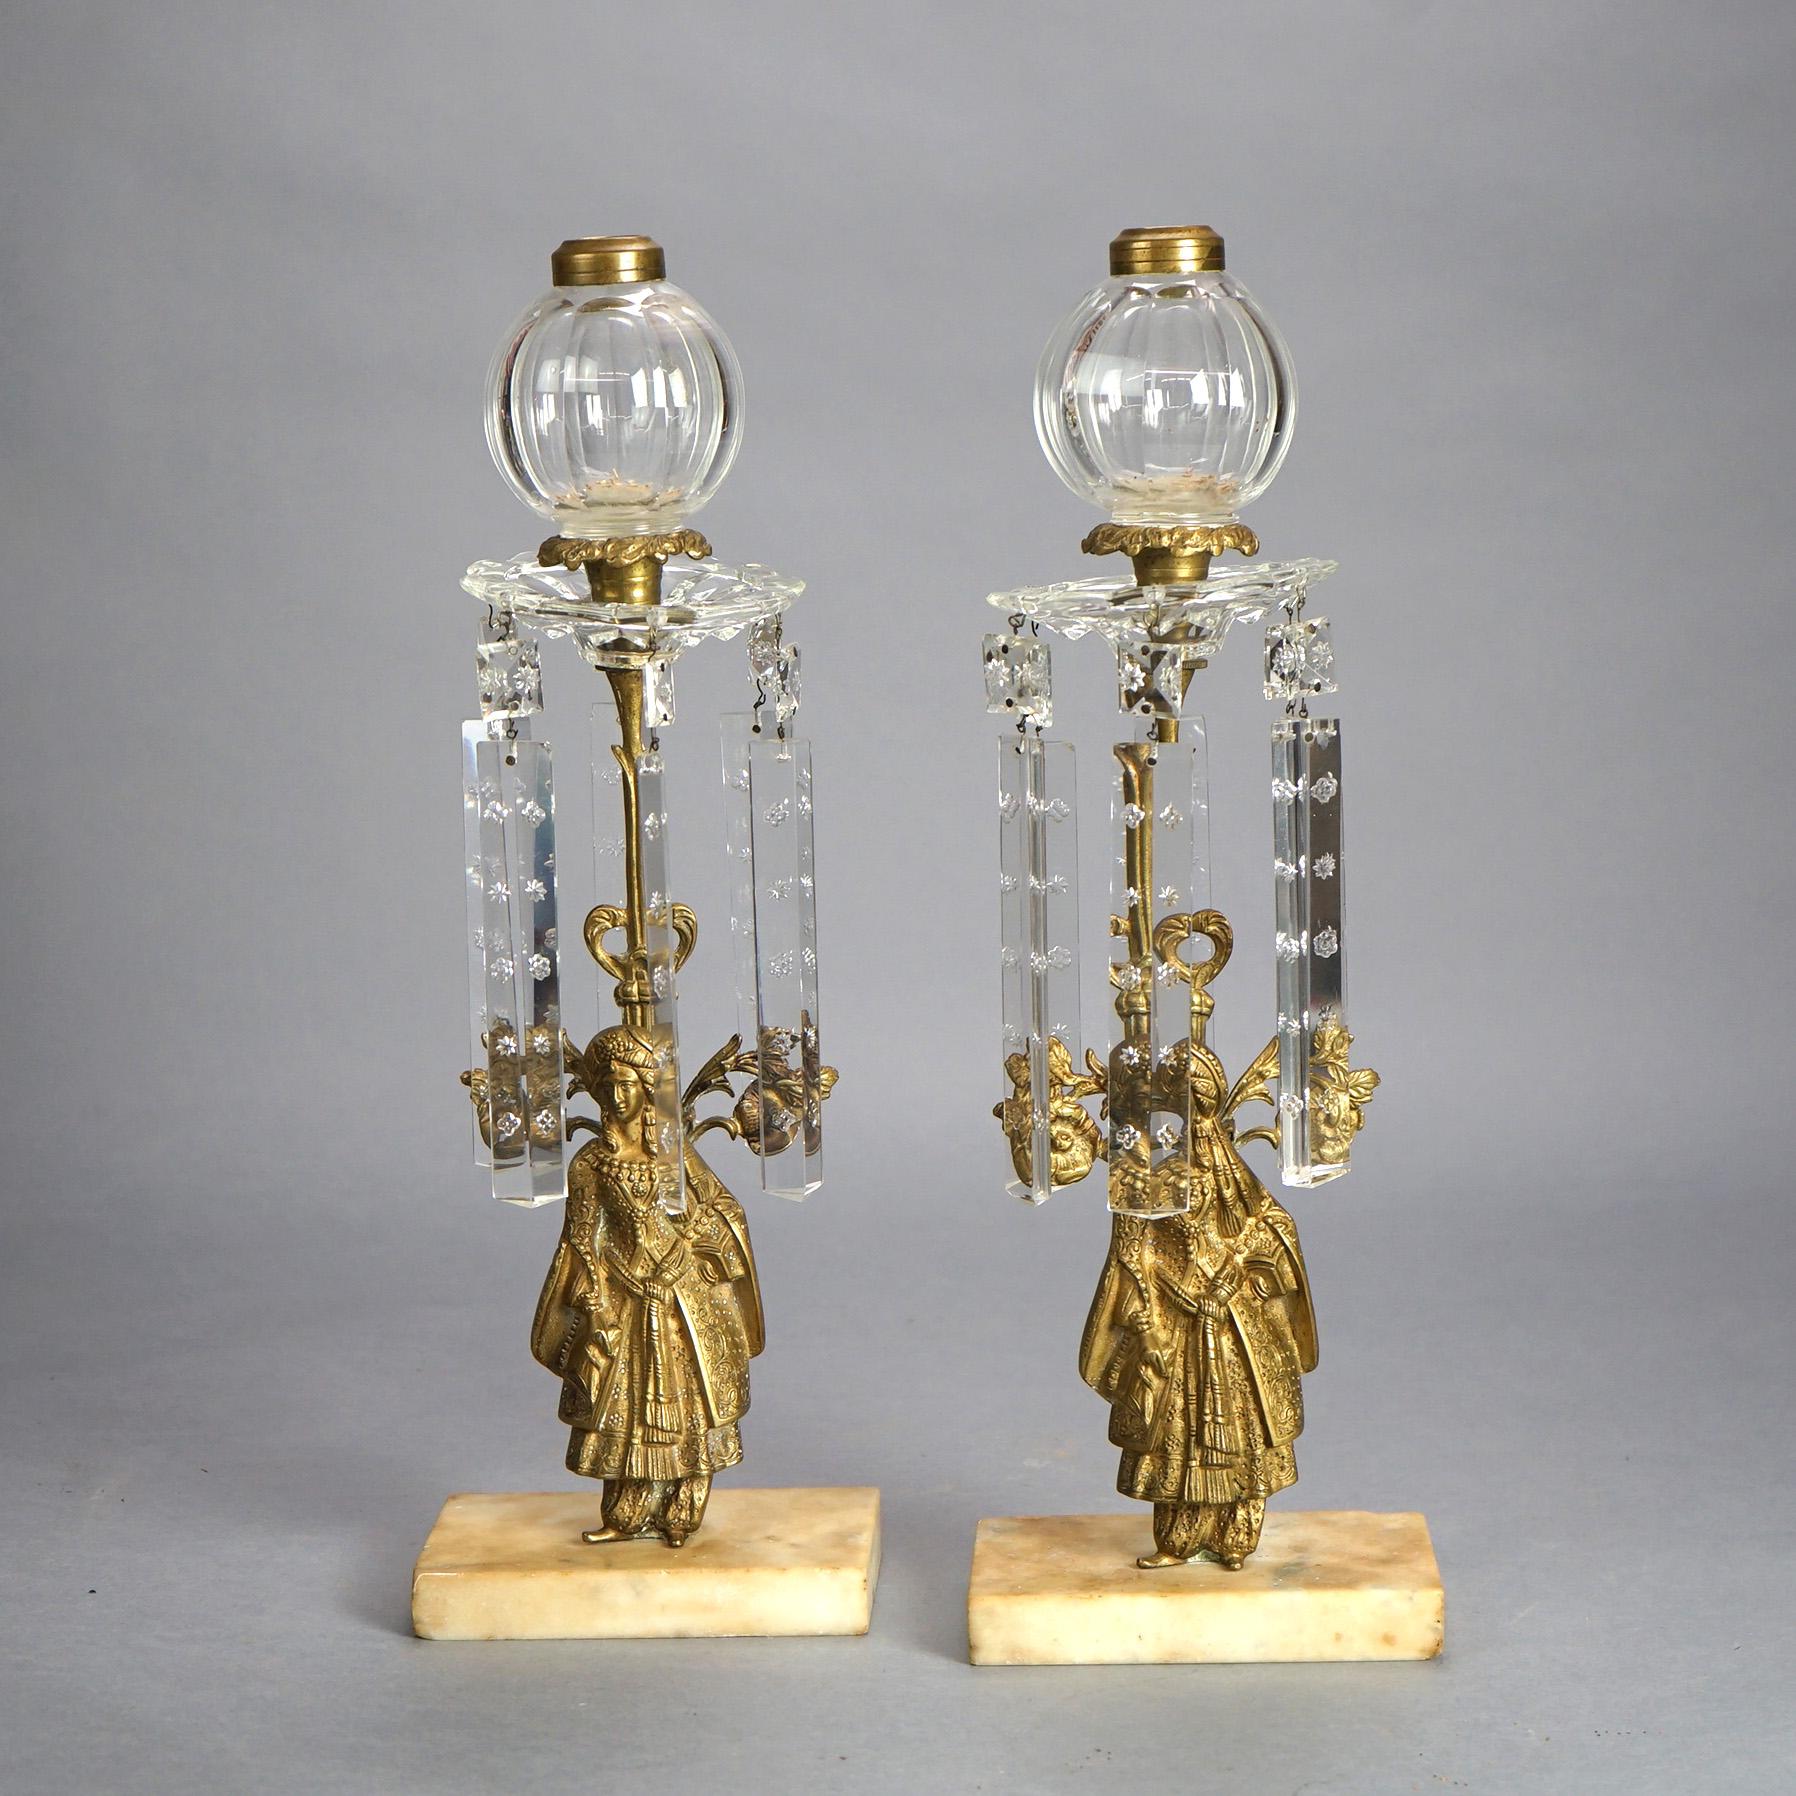 Cast Antique Pair Figural Girandole Sultana Design Oil Lamps with Crystals C1880 For Sale